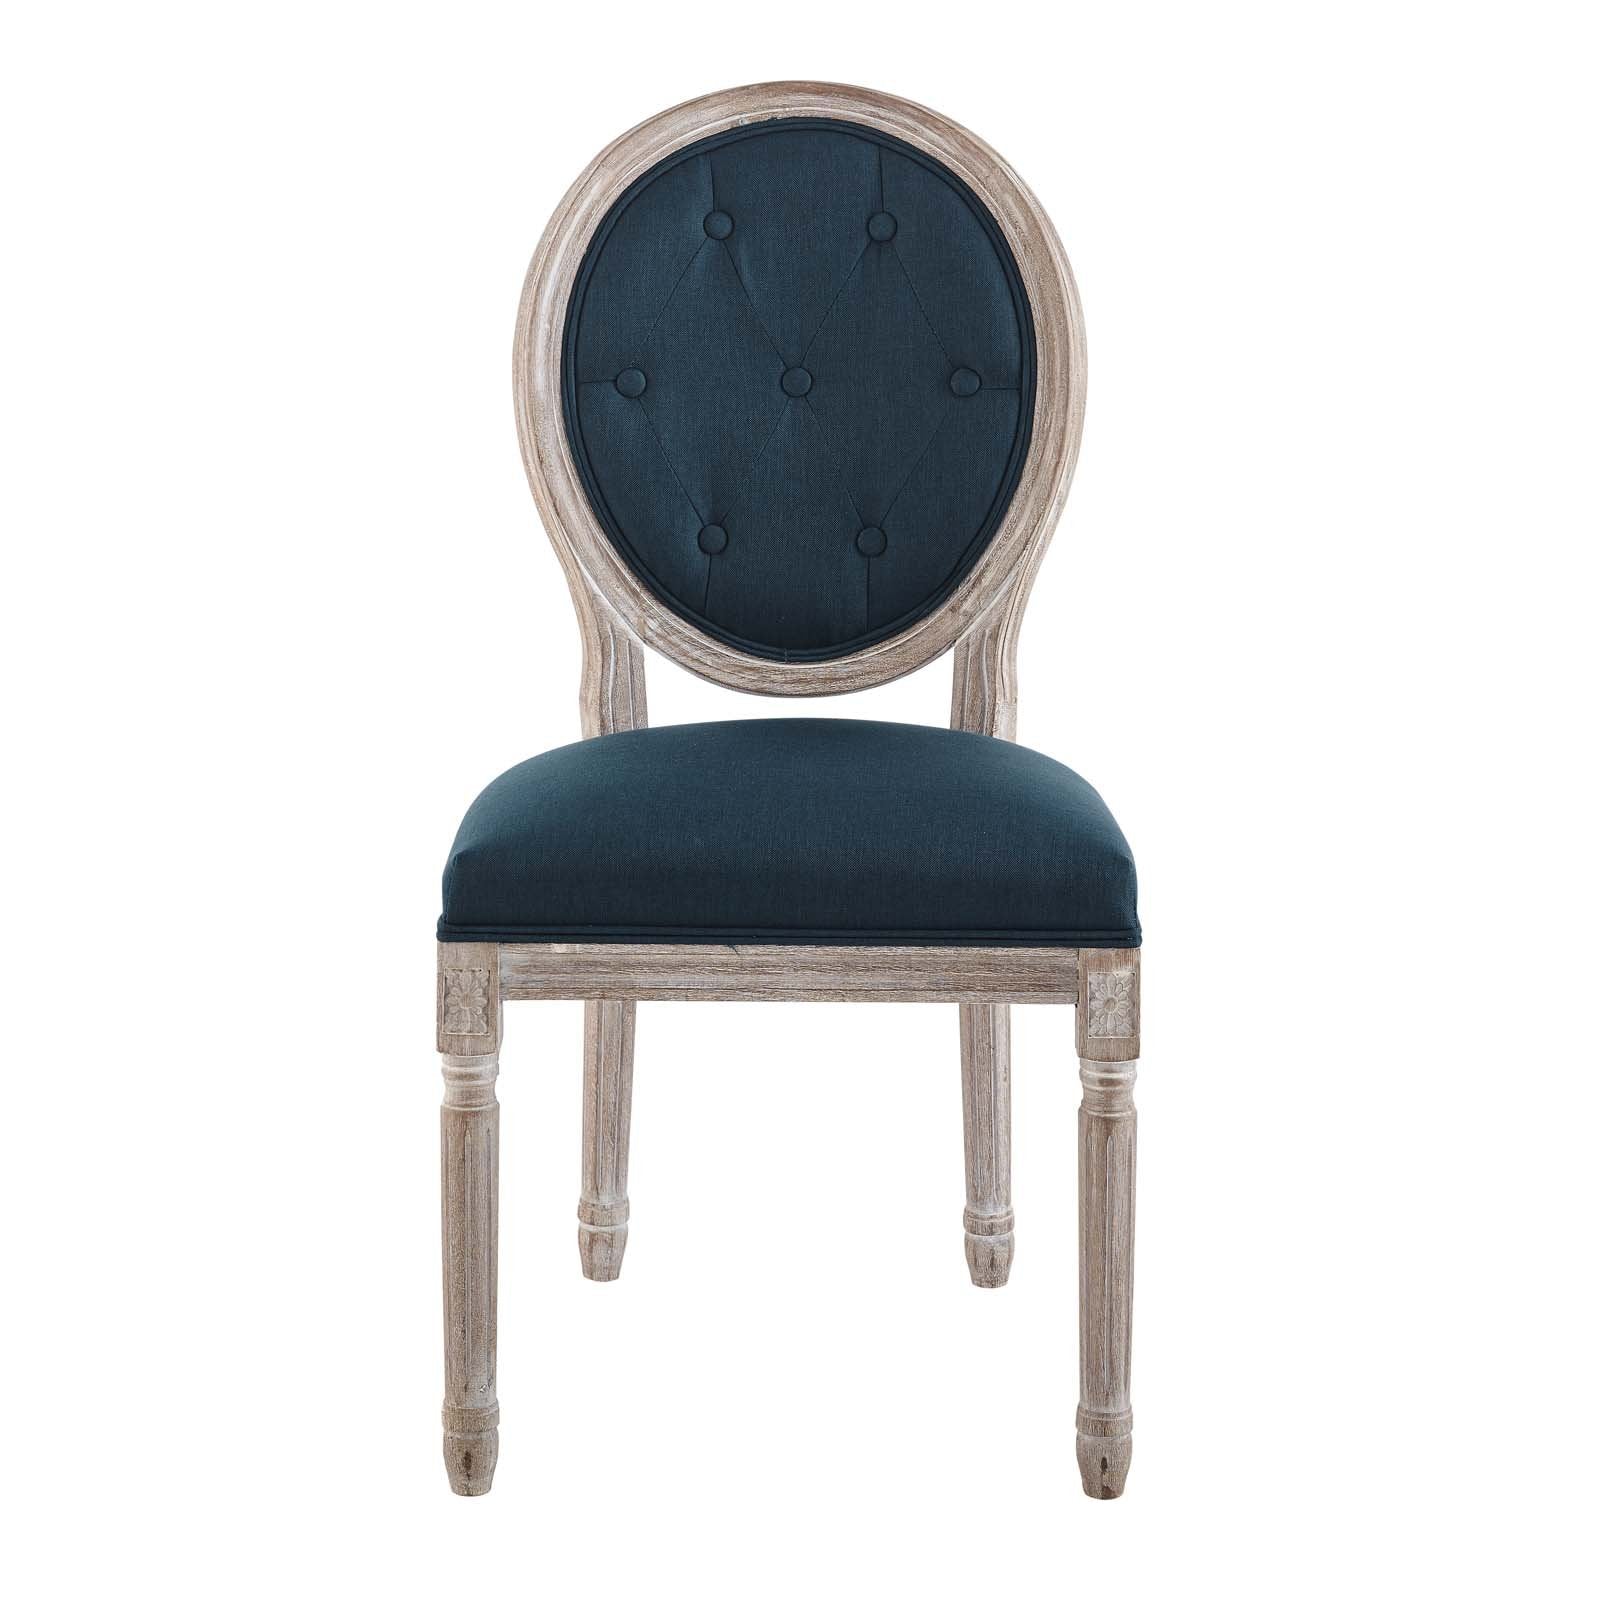 Arise Vintage French Upholstered Fabric Dining Side Chair